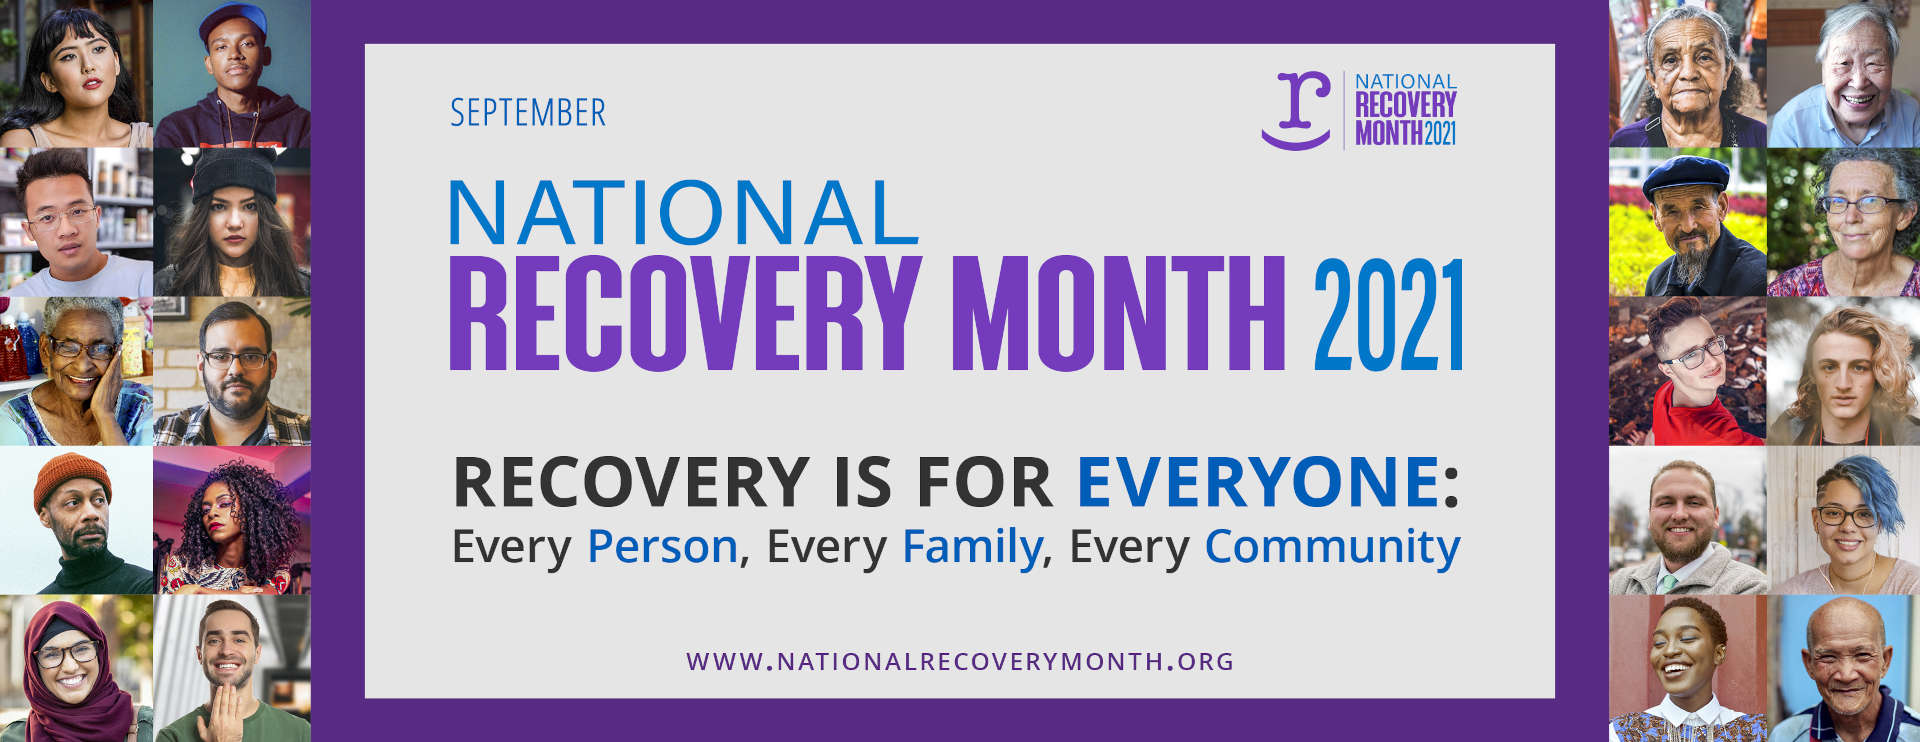 National Recovery Month | 2021 | Turning Point of Tampa